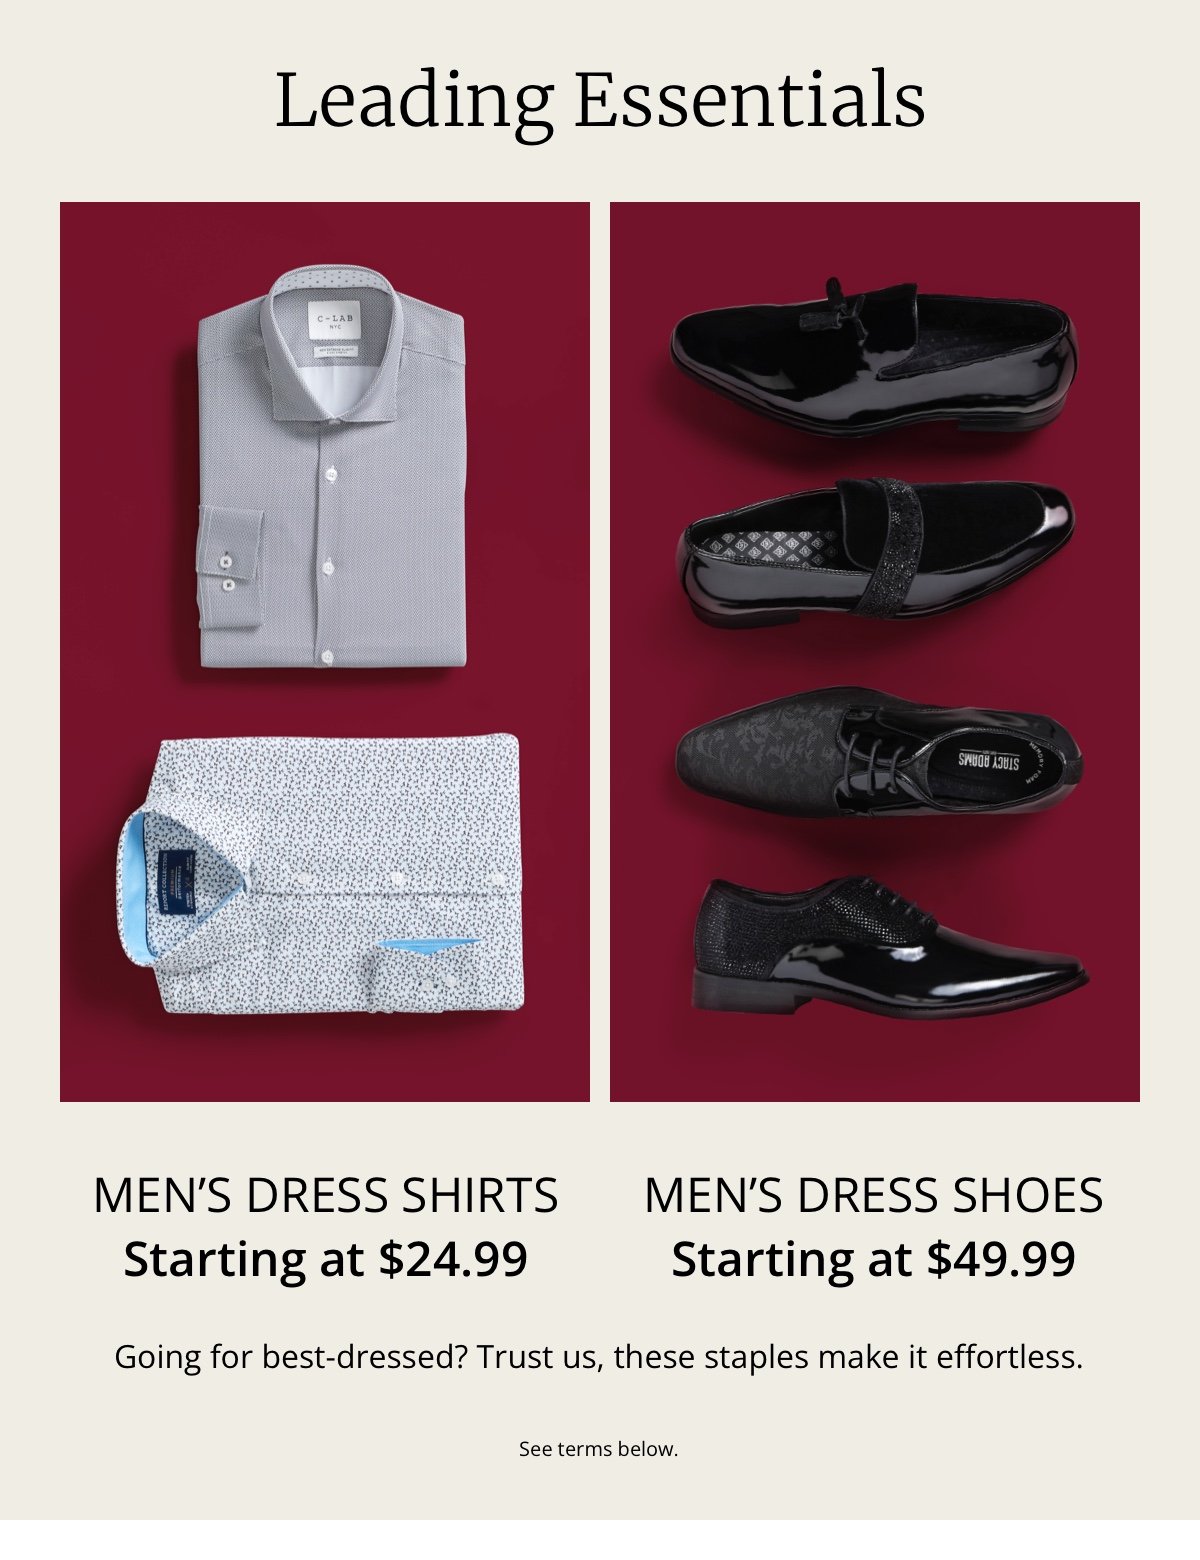 Leading Essentials|Men’s Dress Shirts|Starting at \\$24.99|Men’s Dress Shoes|Starting at \\$49.99|Going for best-dressed? Trust us, these staples make it effortless.|See terms below